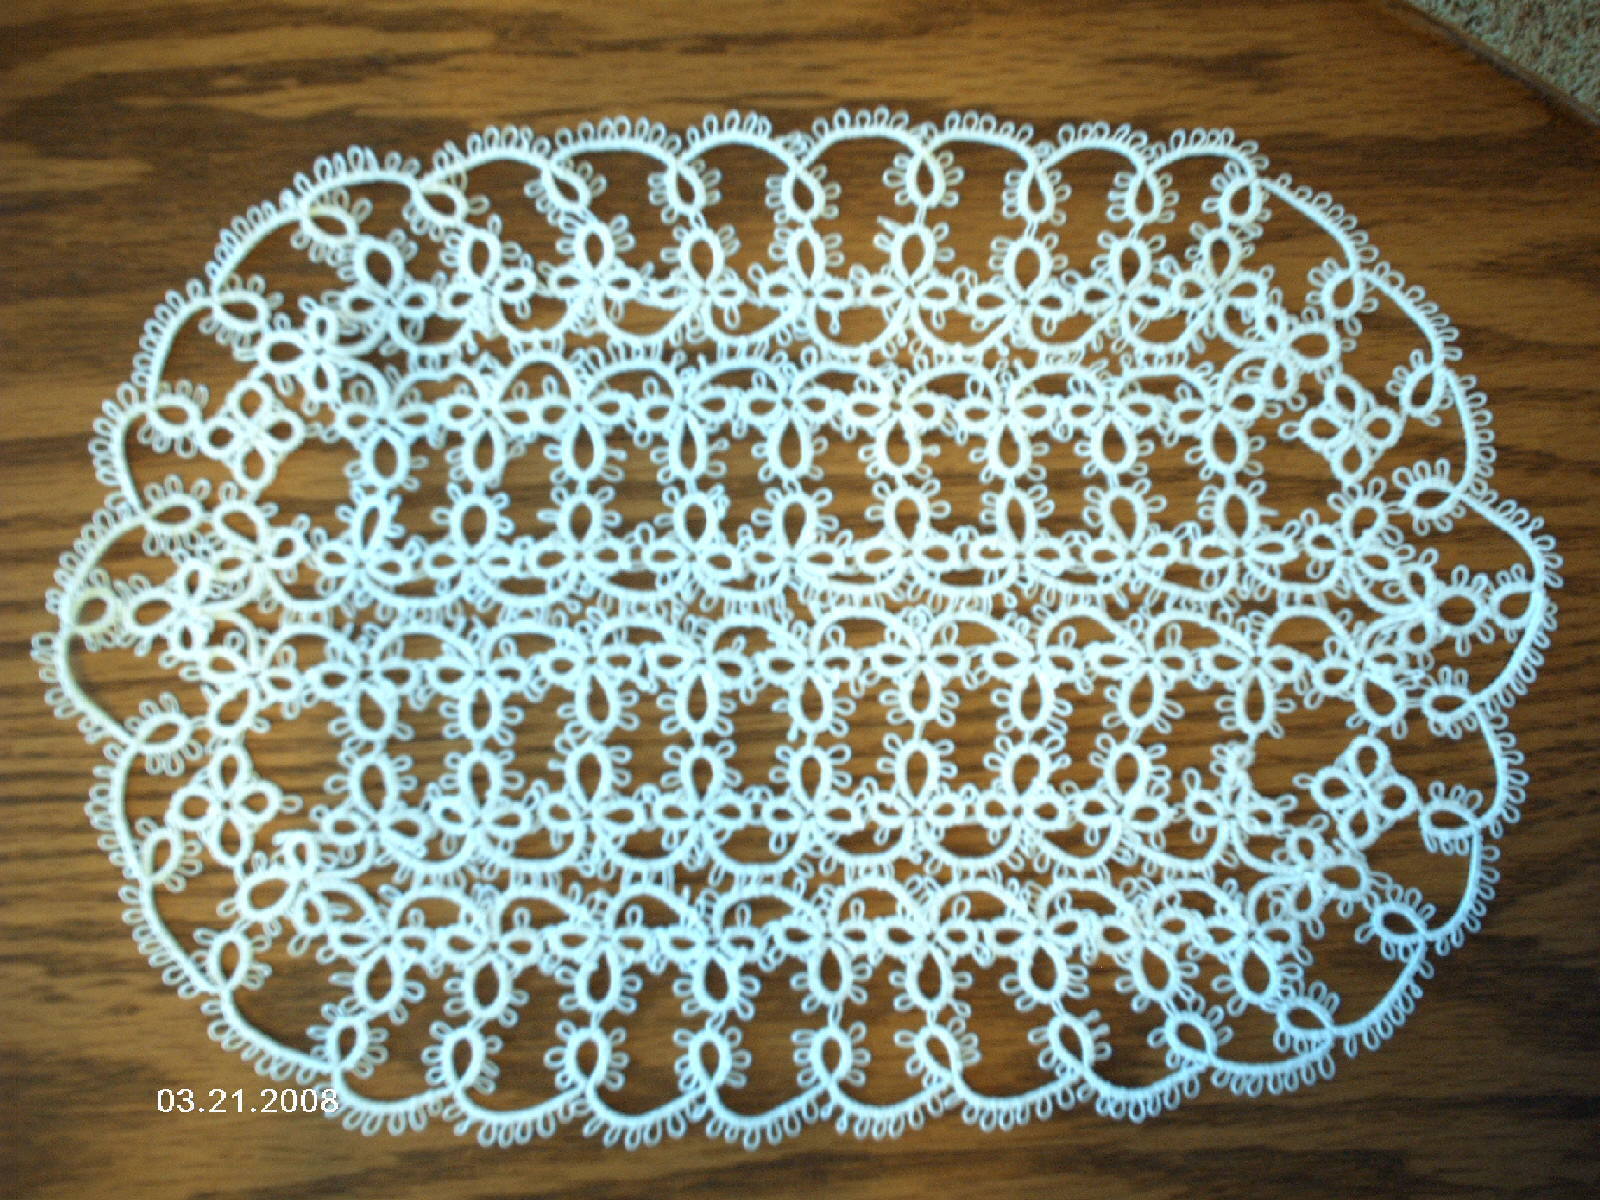 Tatted Doily - Tatting, White 10"x14" Oval Doily, Centerpiece, Handmade Lace